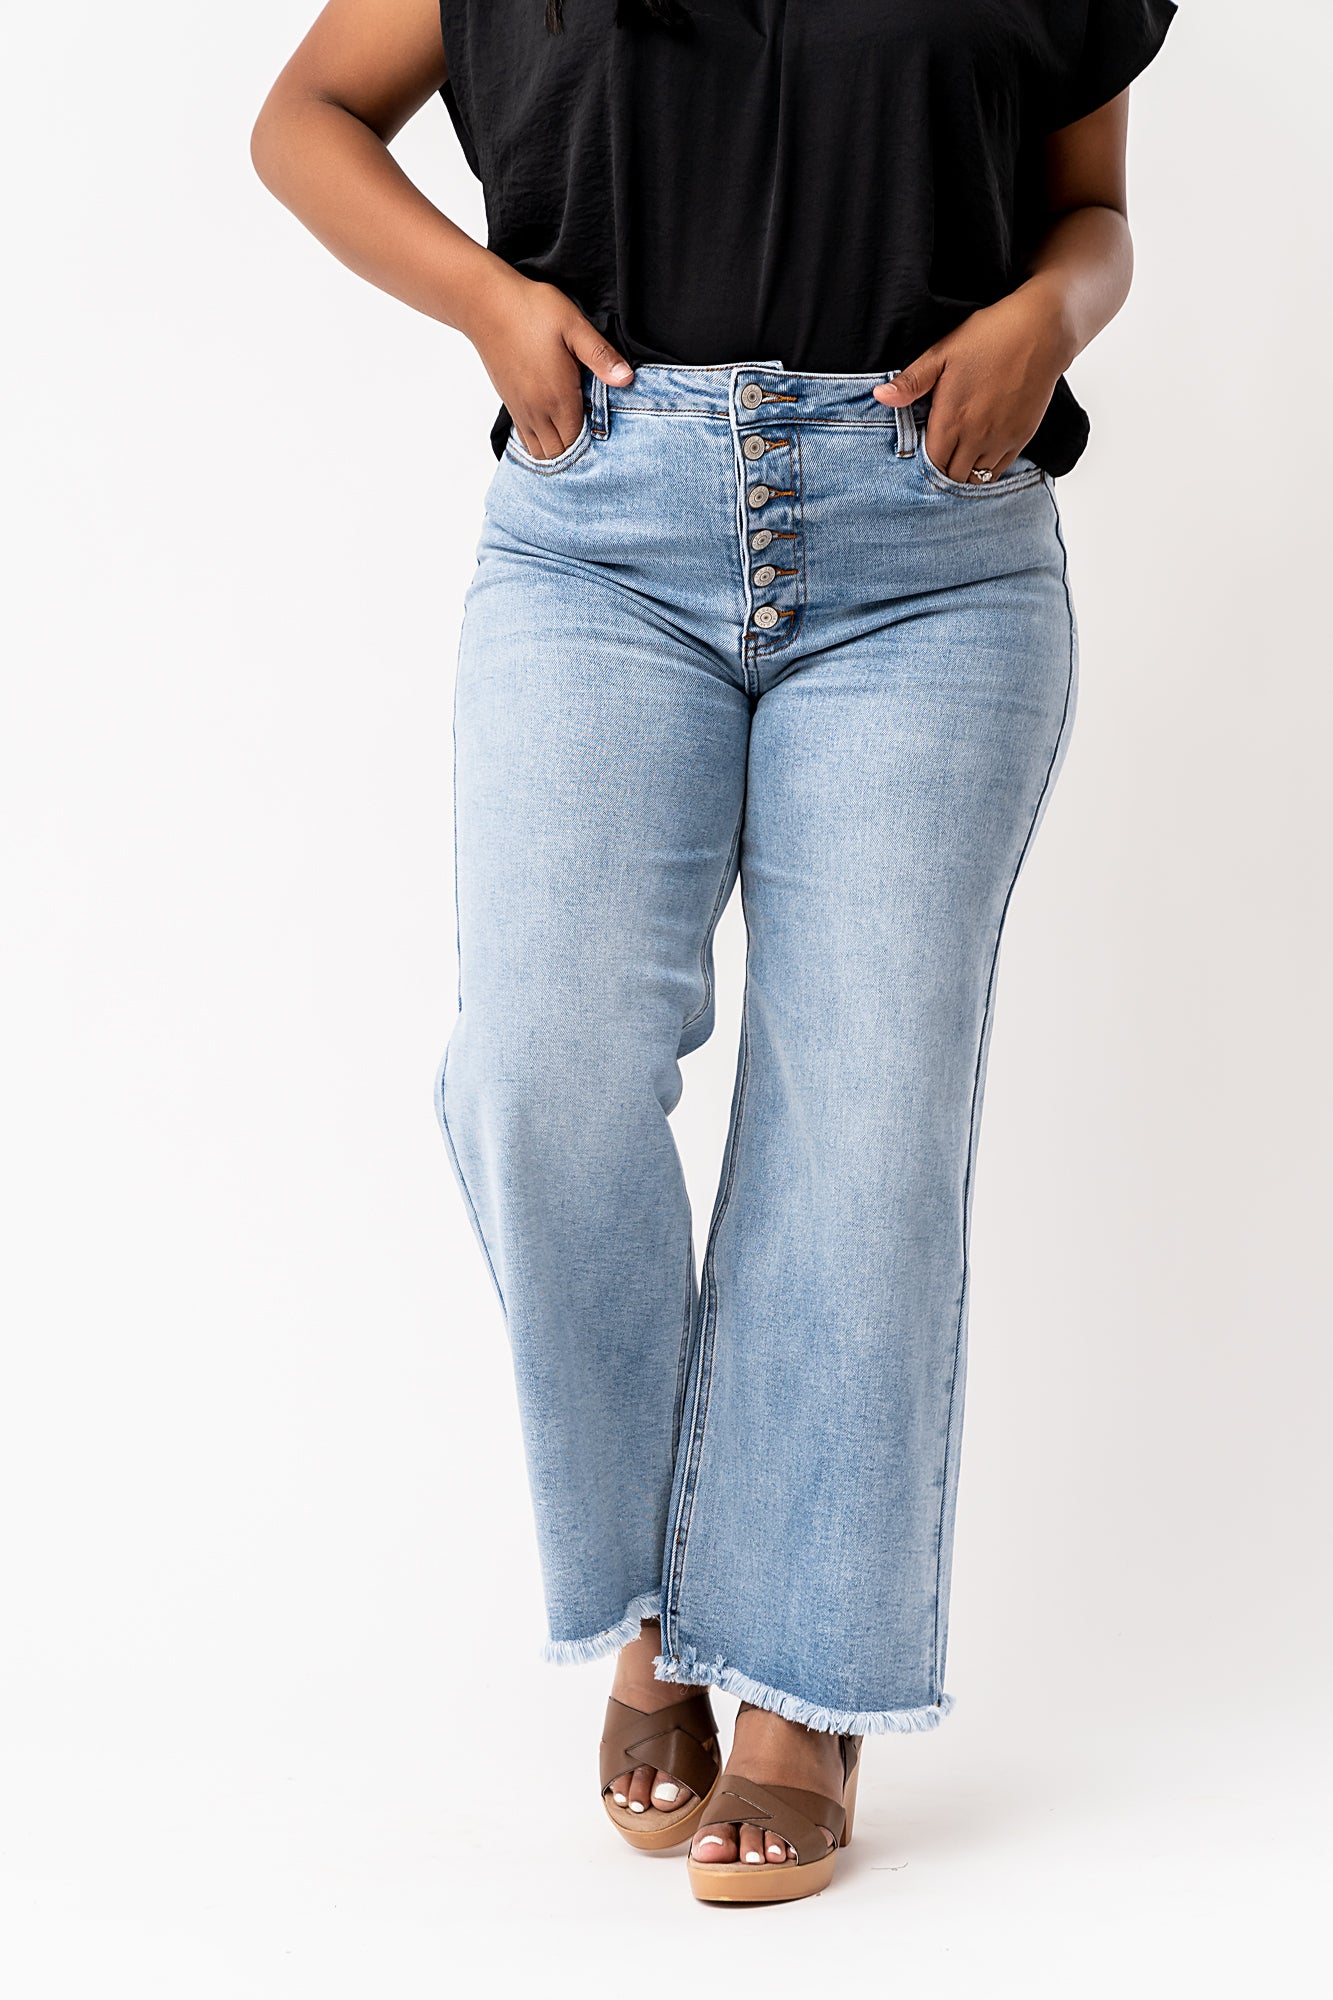 Hampton Button Fly Jeans - RESTOCK COMING! Apparel & Accessories Holley Girl 